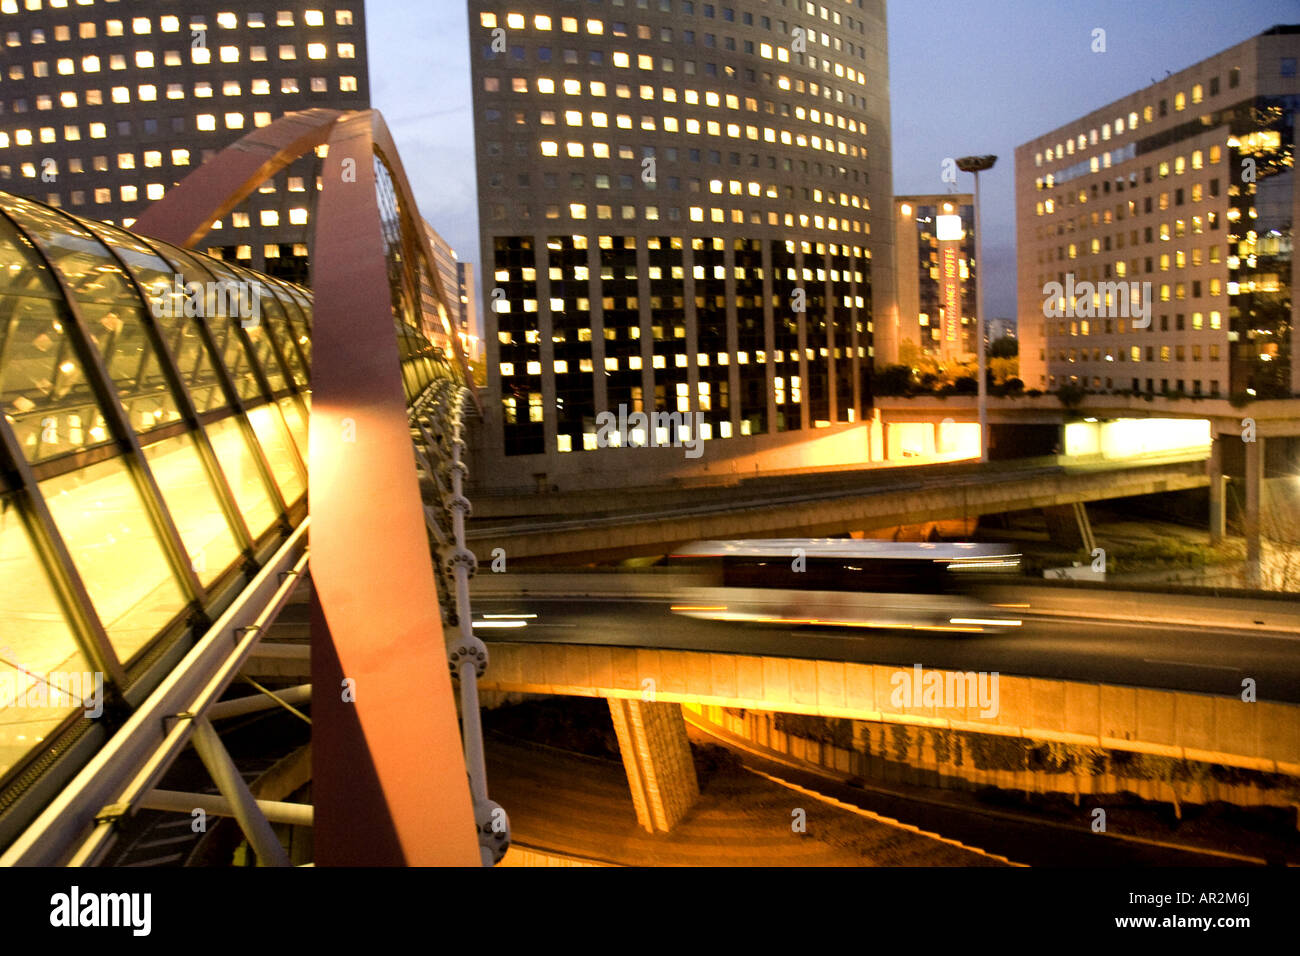 View at the blocks of houses with footbridge in the foreground, France, La Defense, Paris Stock Photo